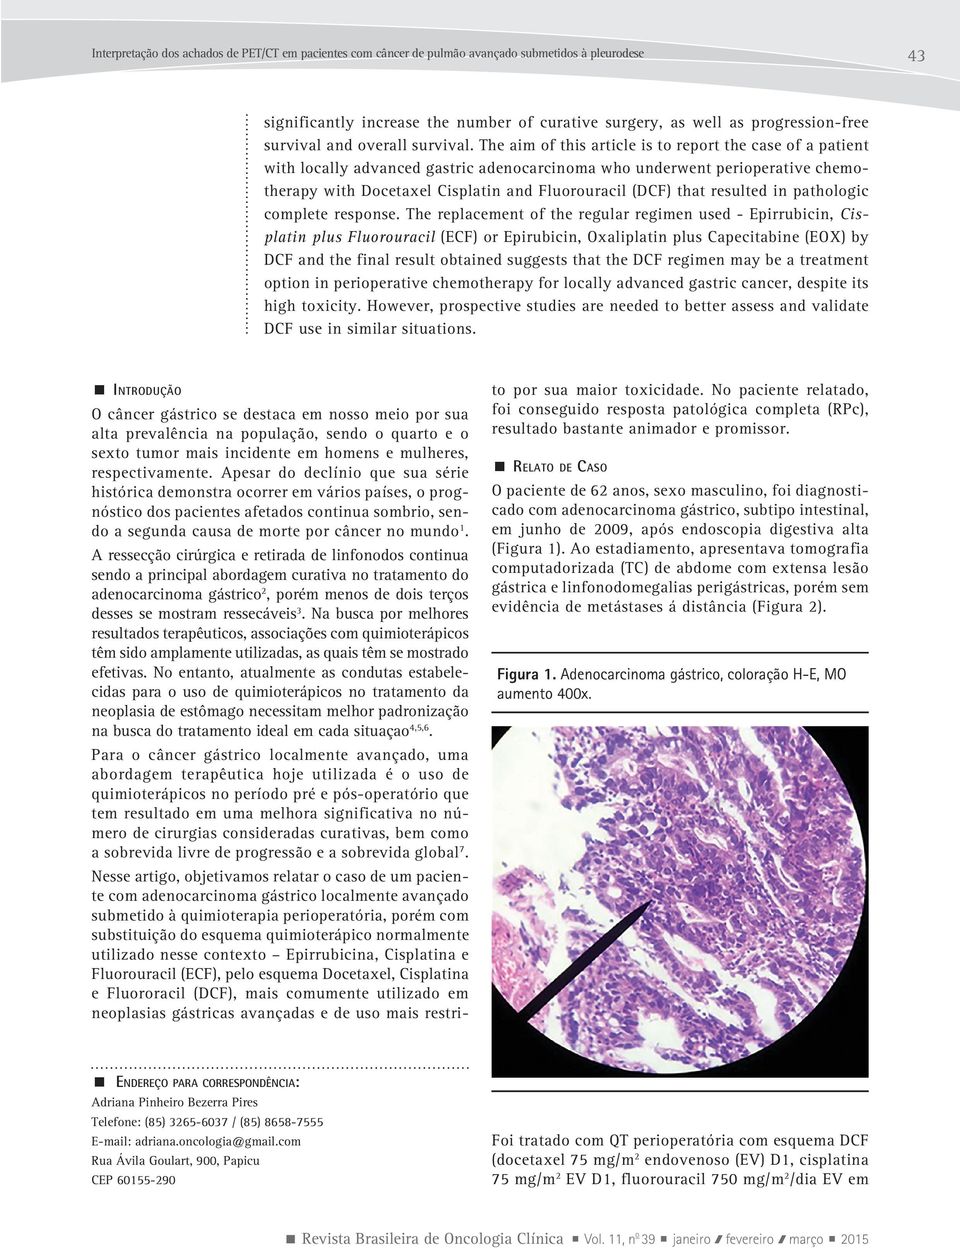 The aim of this article is to report the case of a patient with locally advanced gastric adenocarcinoma who underwent perioperative chemotherapy with Docetaxel Cisplatin and Fluorouracil (DCF) that